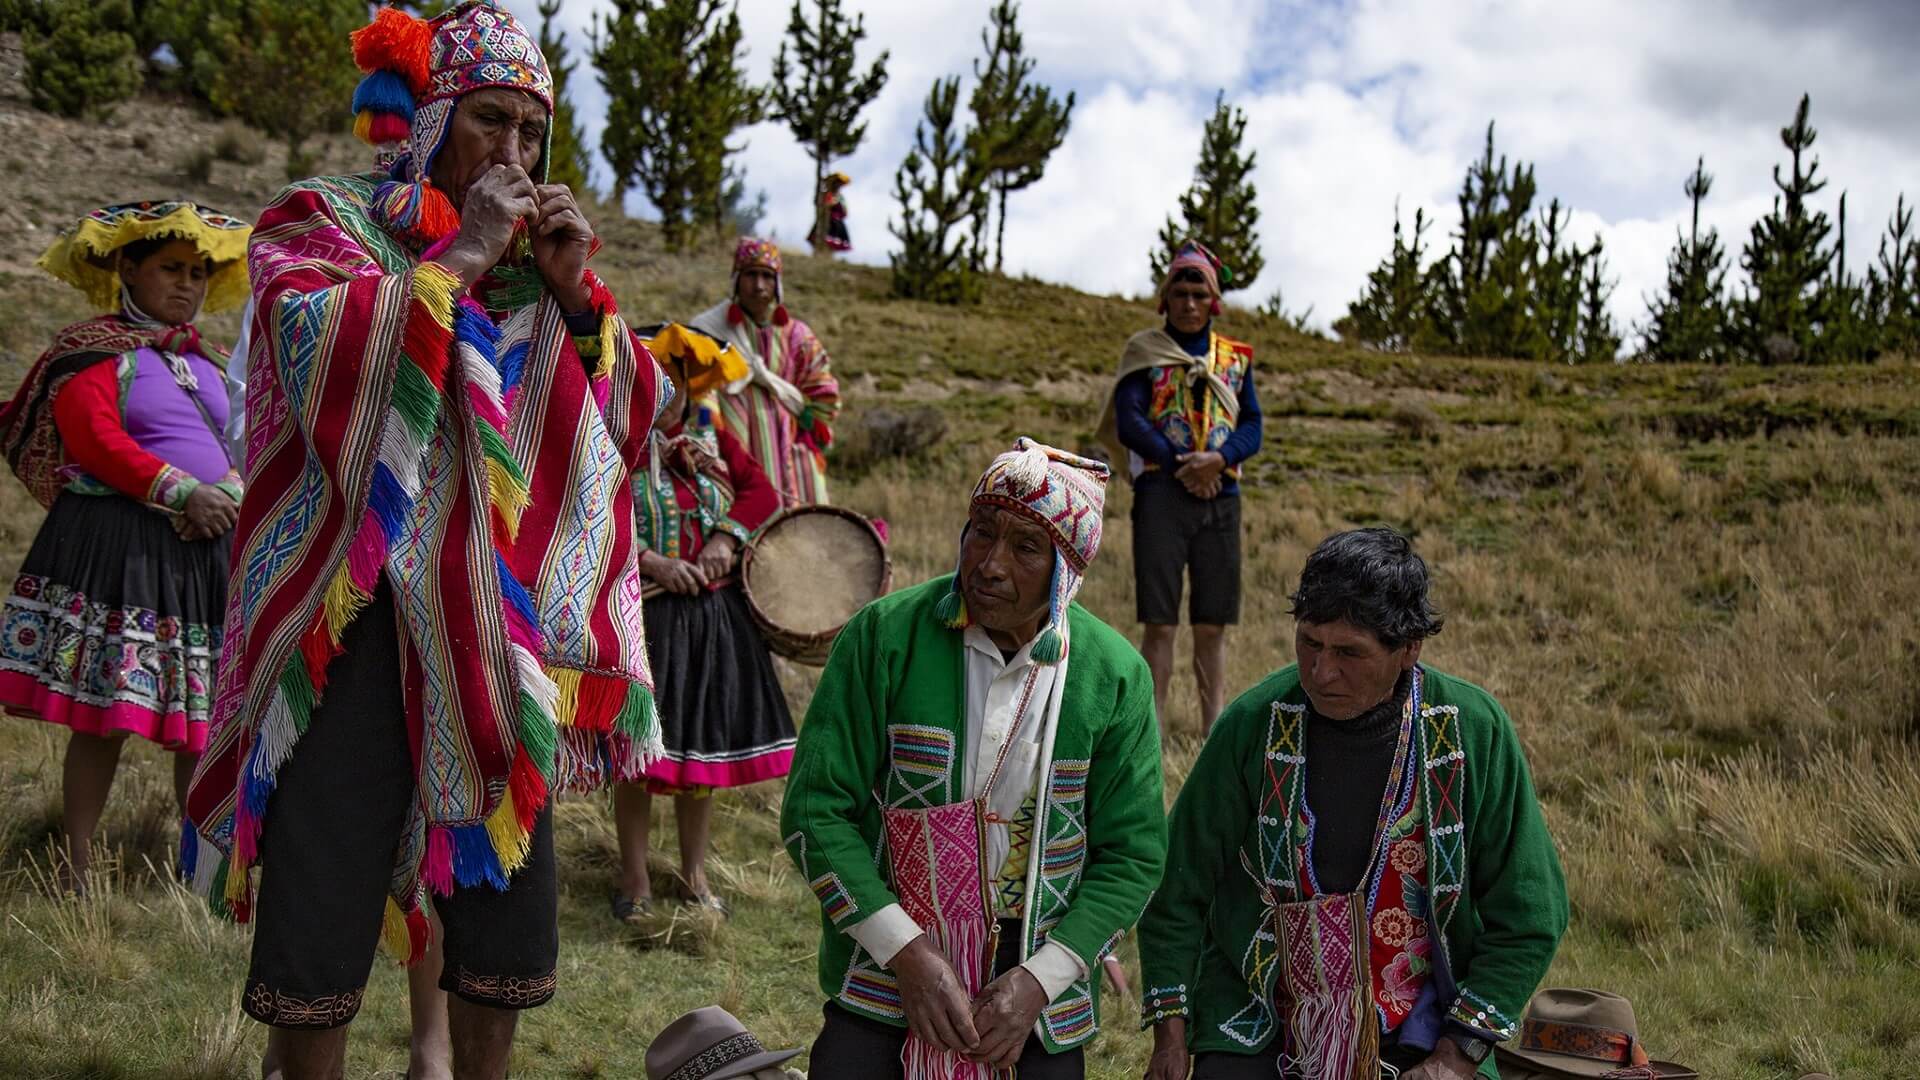 Locals in traditional clothing